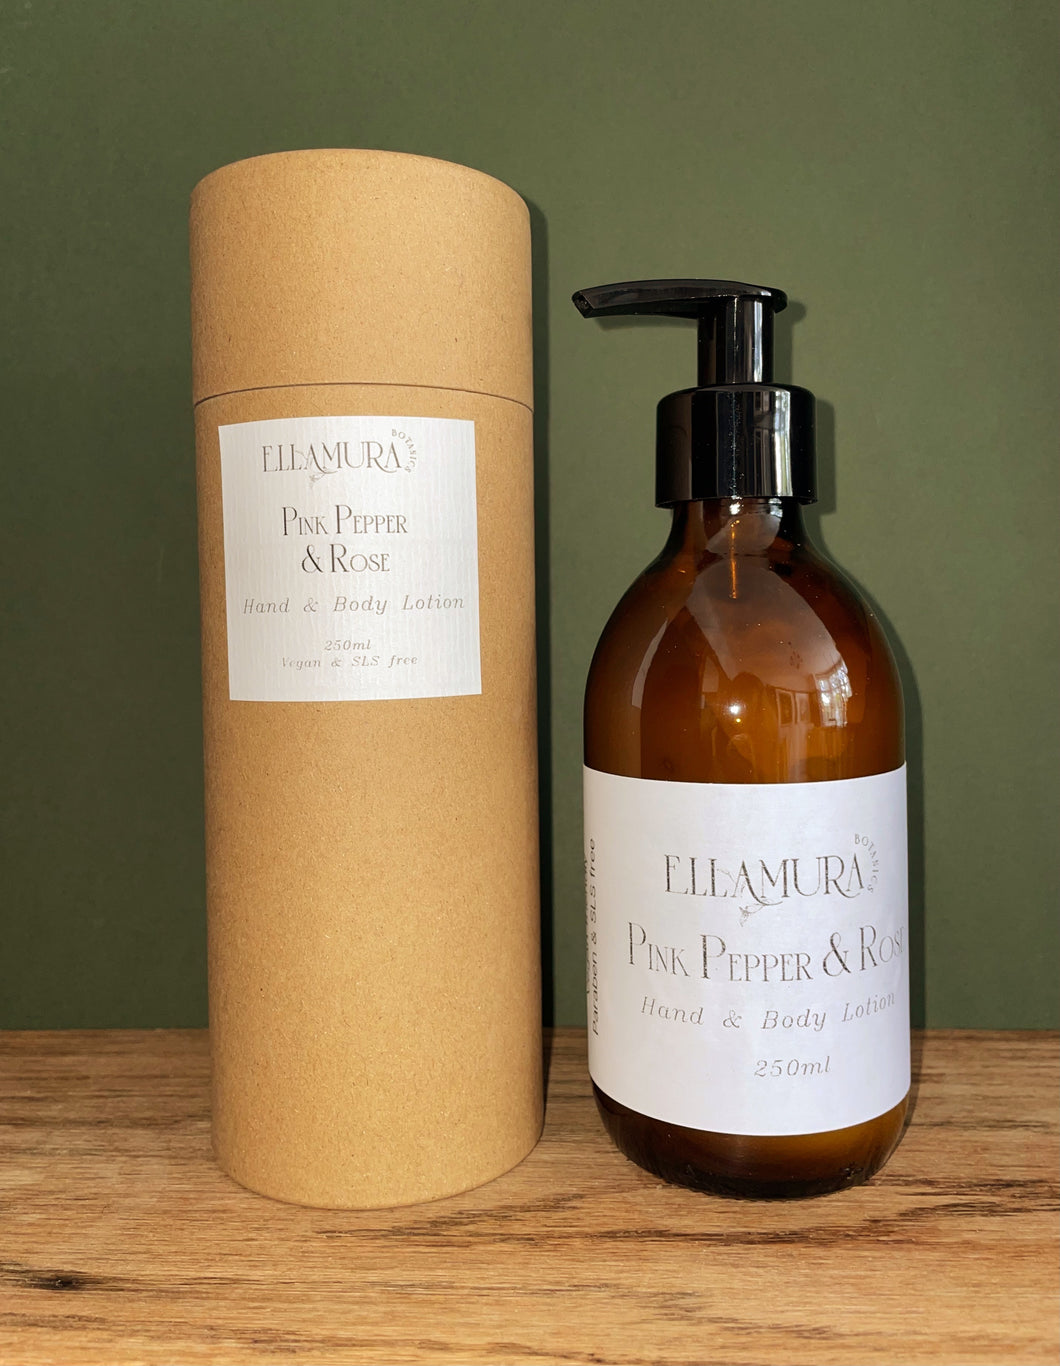 Pink Pepper & Rose Hand & Body Lotion